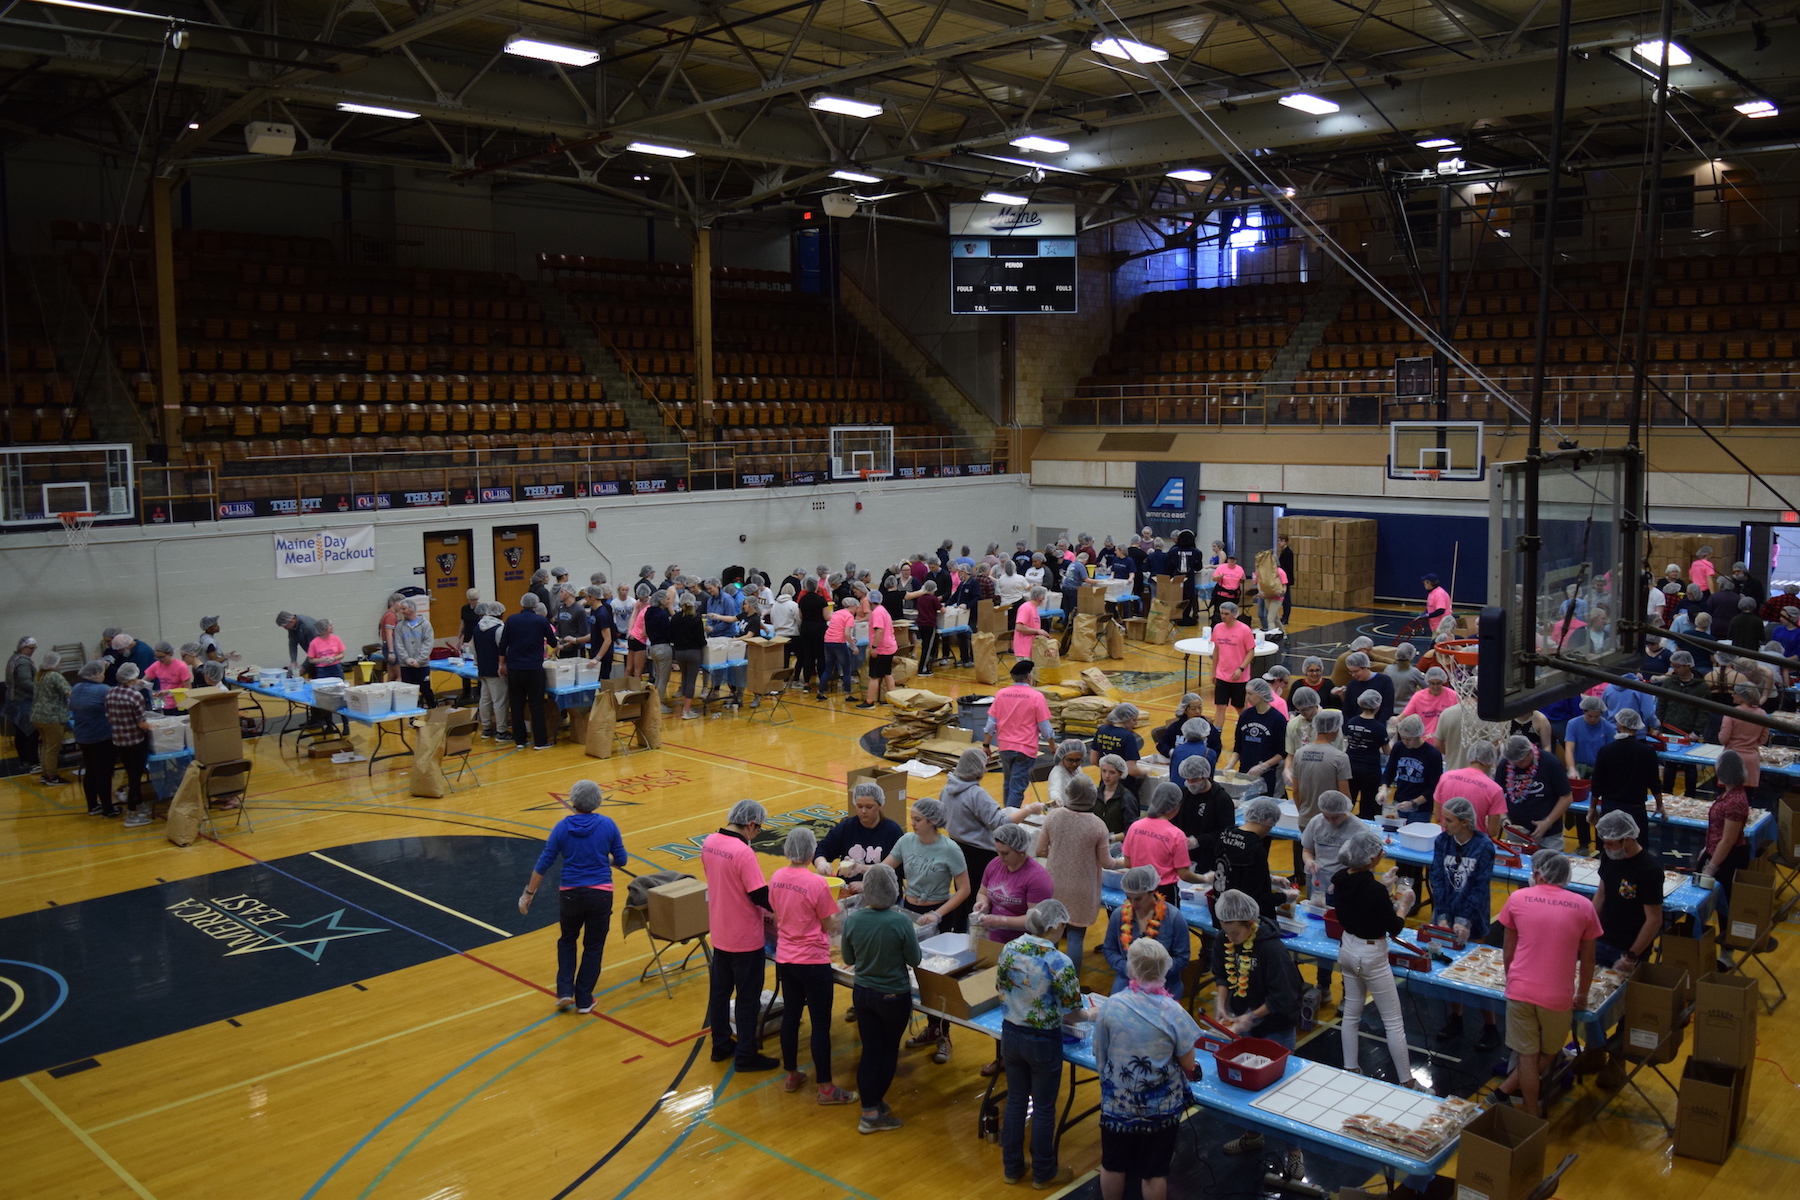 An overhead view of all the participants working in the 2019 Maine Day Meal Packout